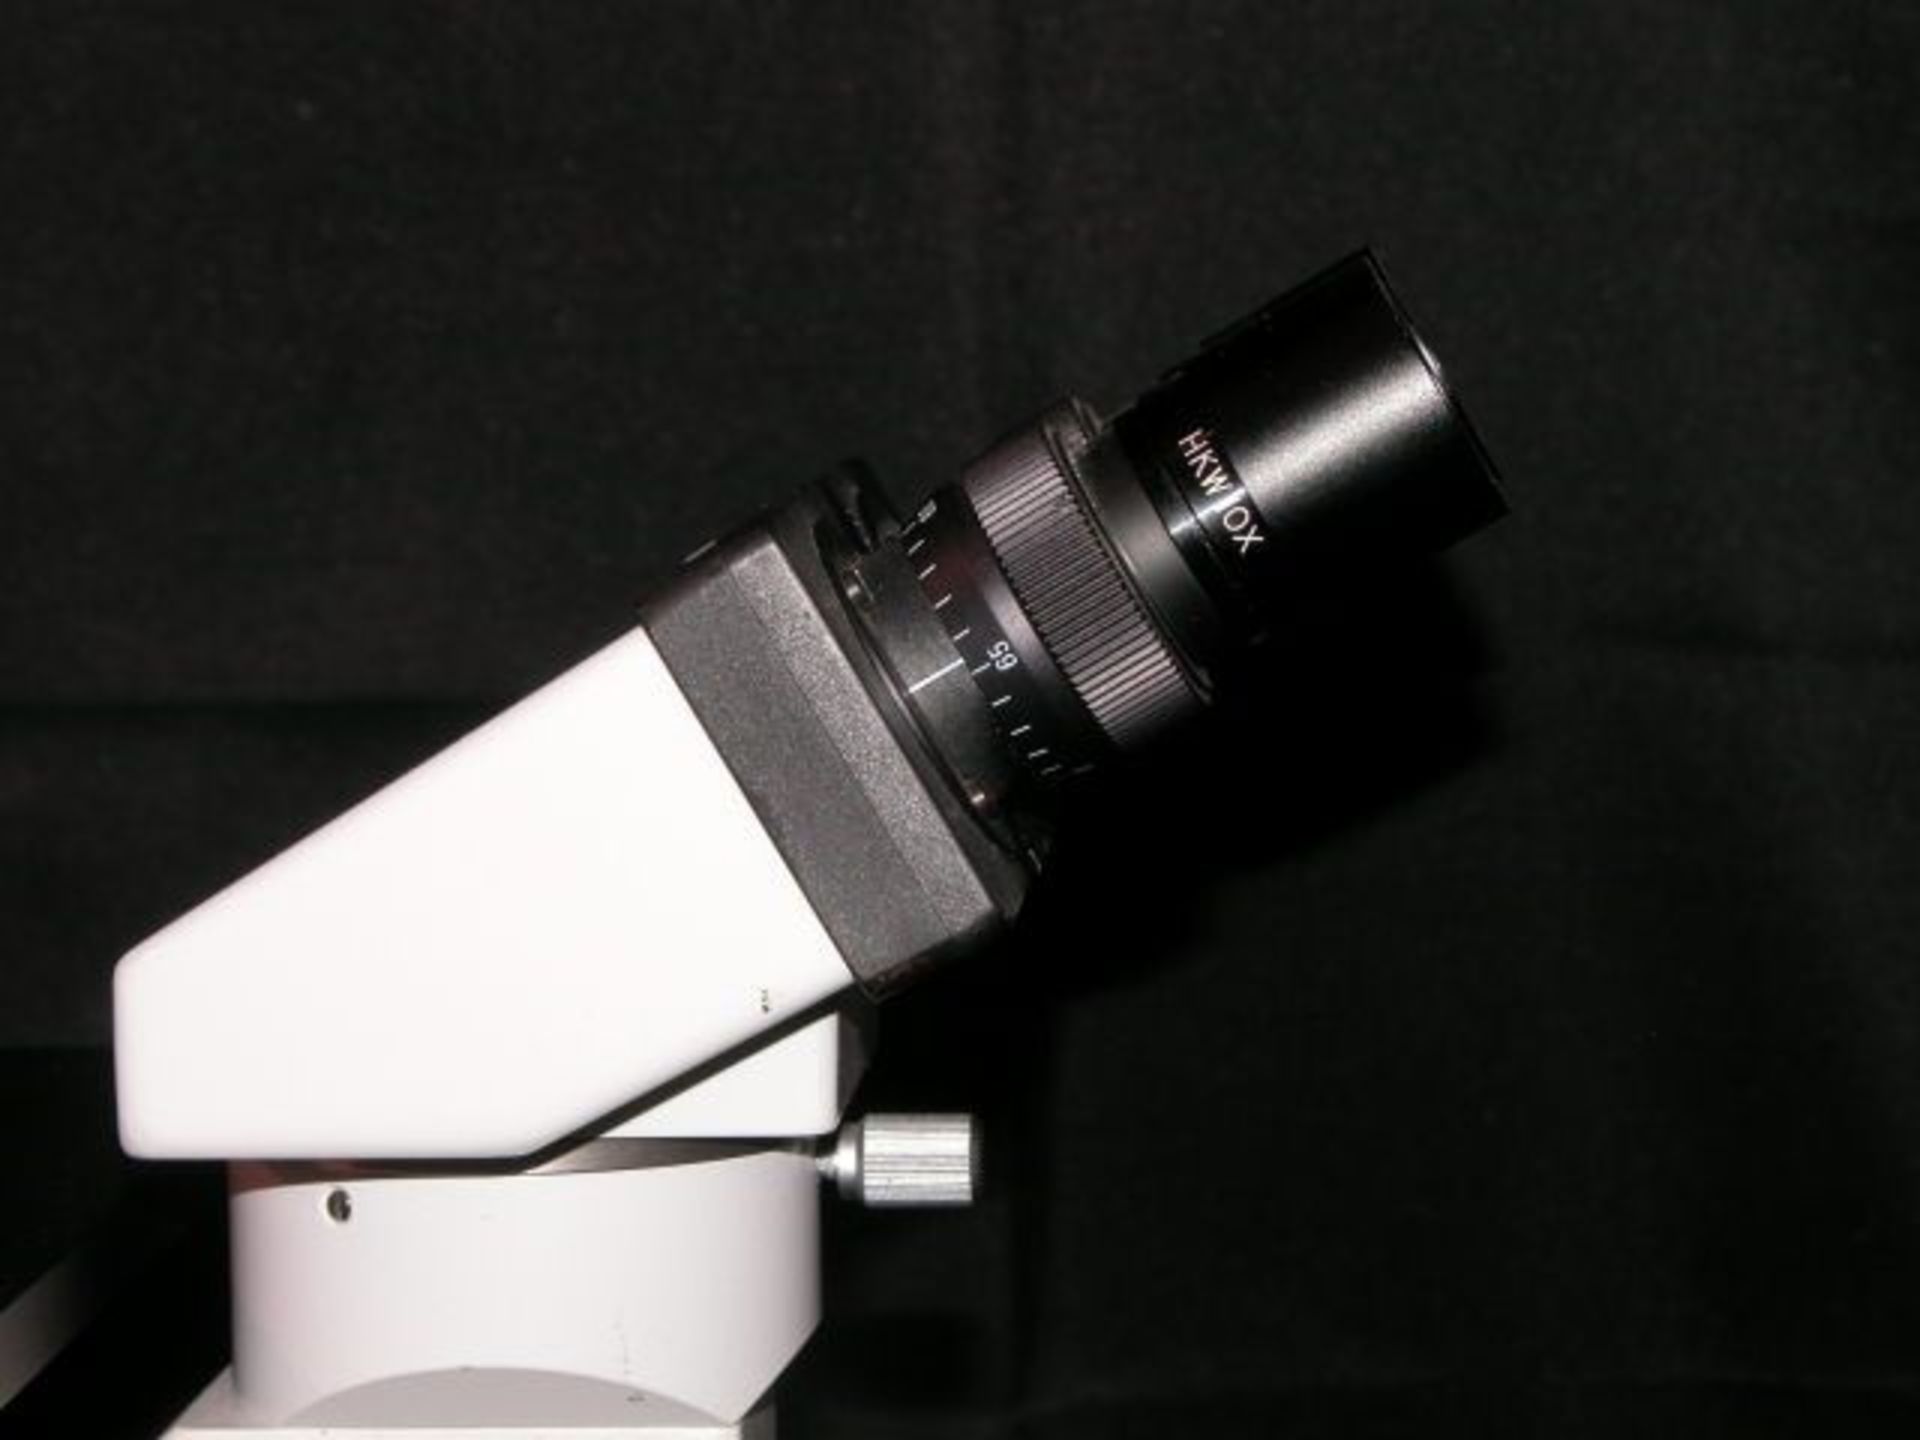 Hund Wetzlar Wilovert A Inverted Microscope 2 Ocular 3 Objectives, Qty 1, 330800442517 - Image 13 of 16